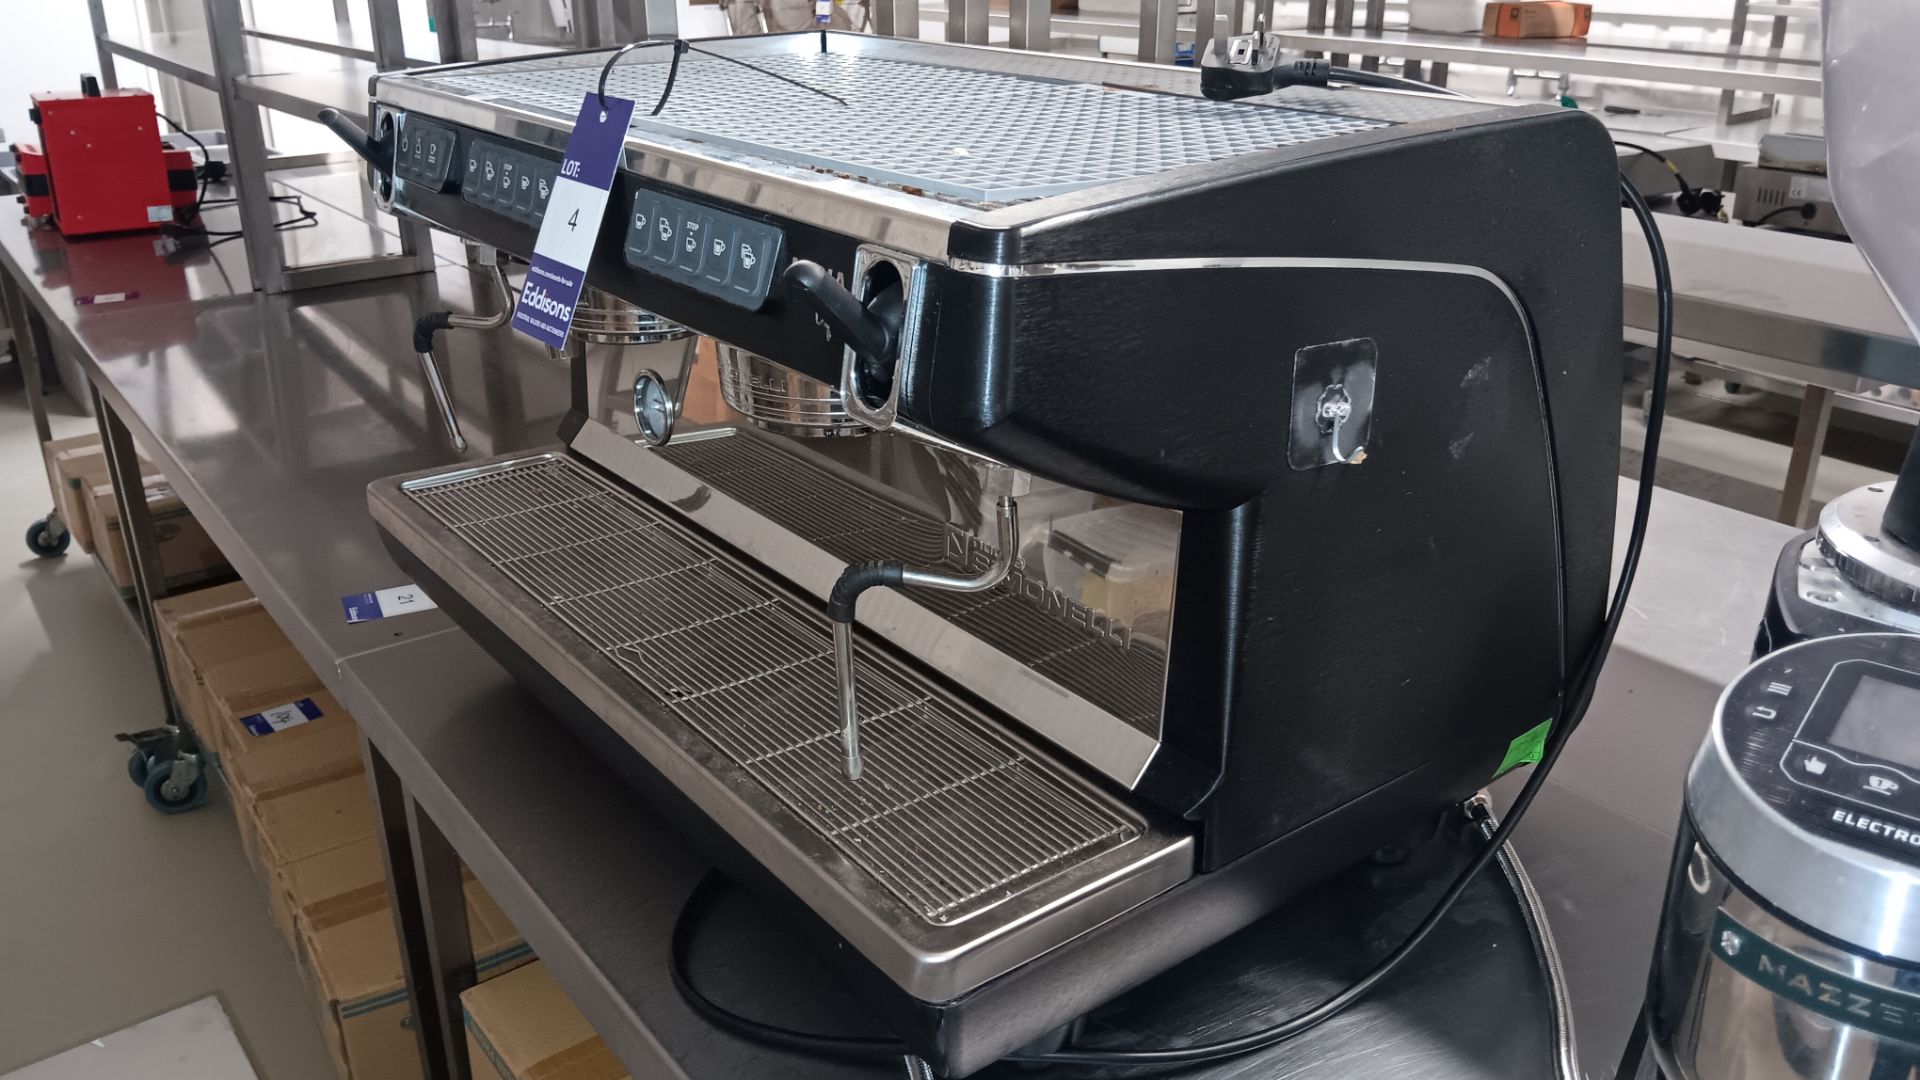 Nuova Simonolli APPIA LIFE 2 Group Commercial Coffee Machine, Serial number 605084 (2020) - Image 3 of 5